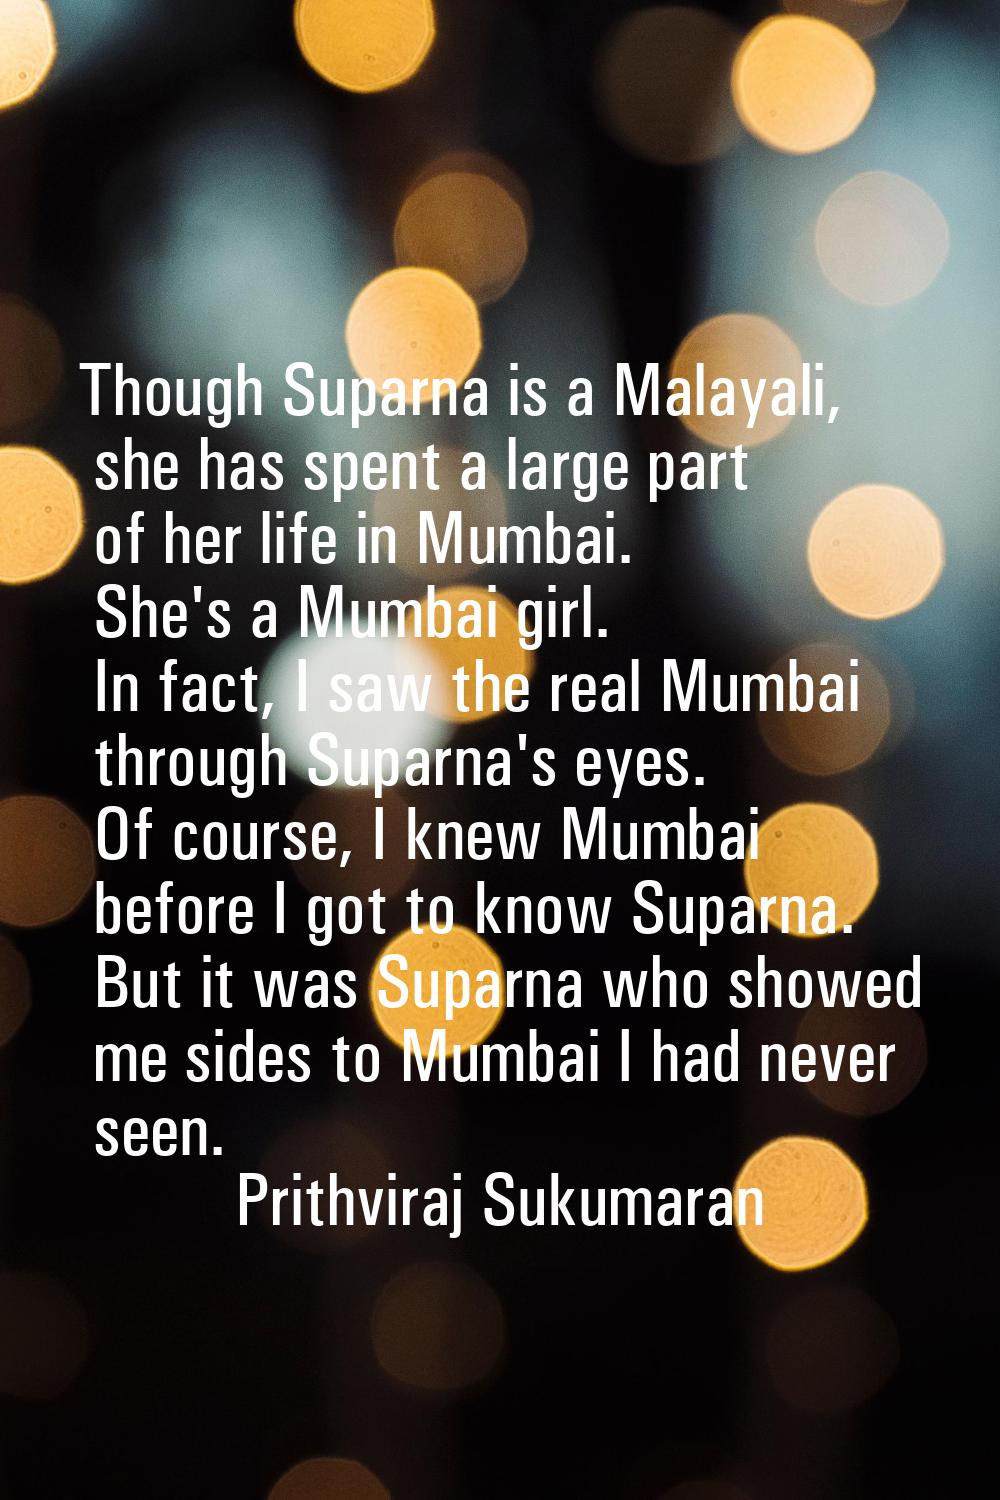 Though Suparna is a Malayali, she has spent a large part of her life in Mumbai. She's a Mumbai girl